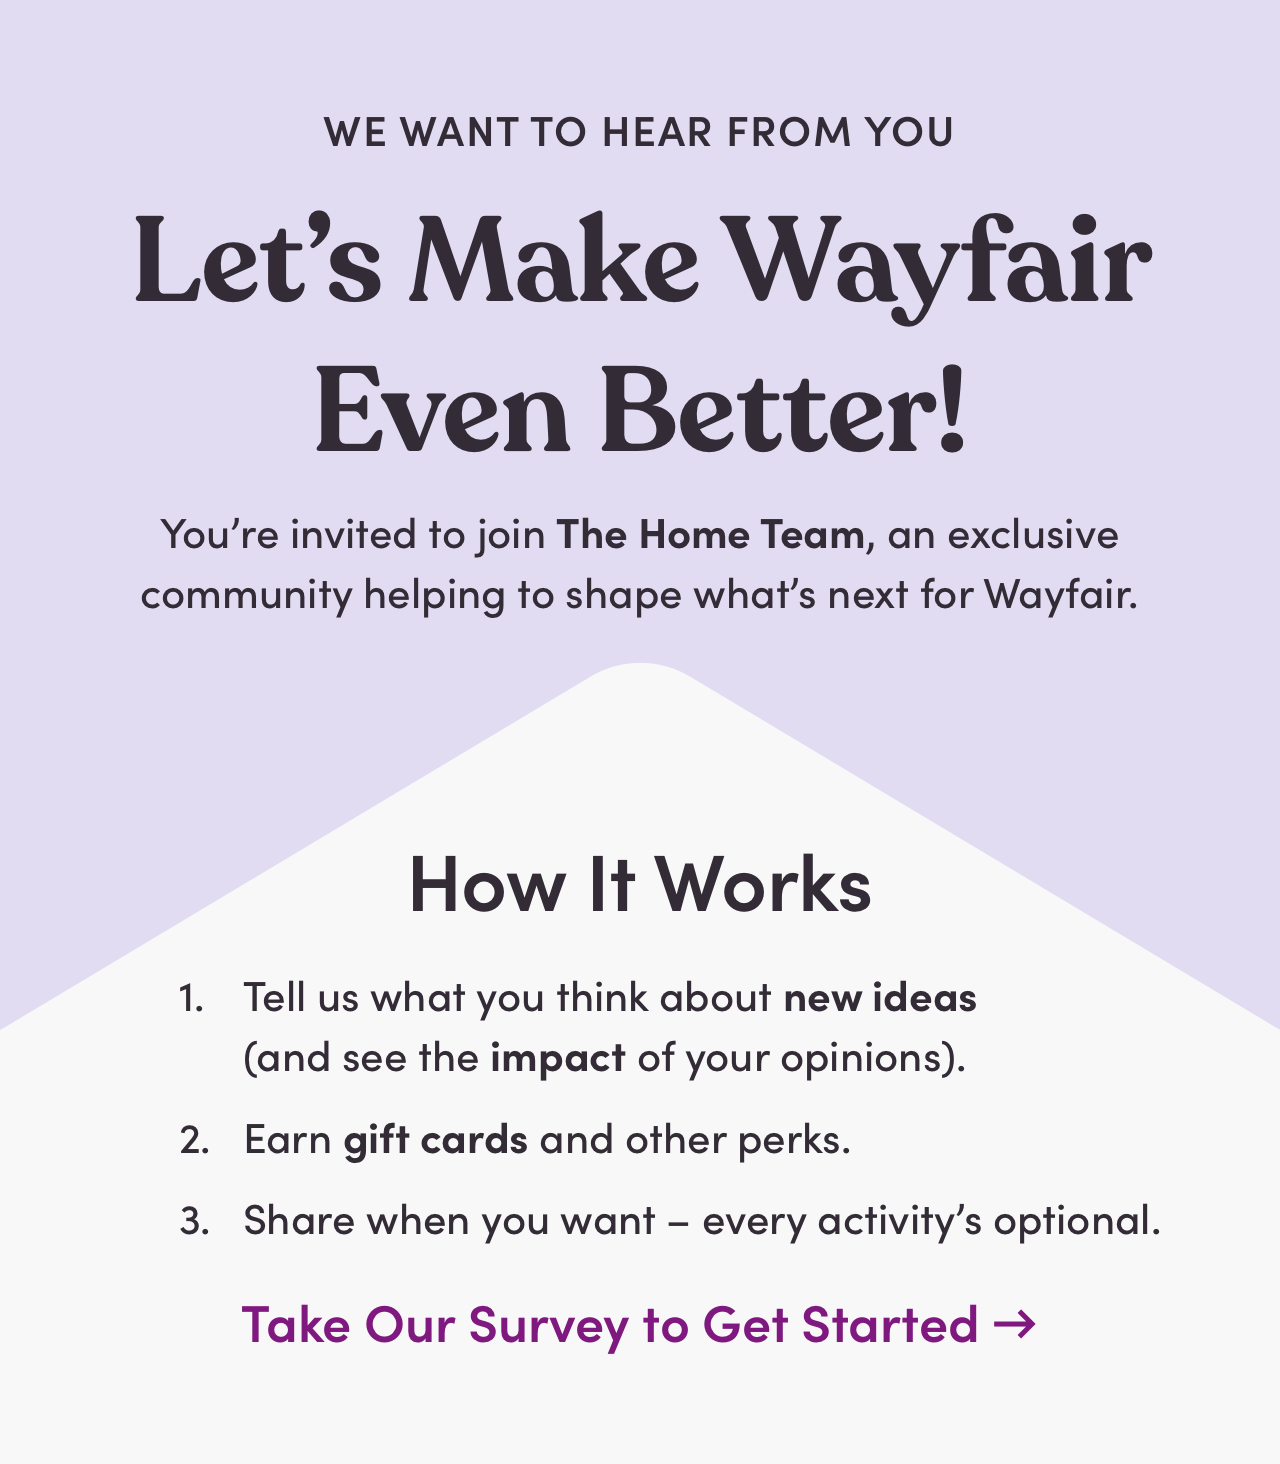 WE WANT TO HEAR FROM YOU Lets Make Wayfair Even Better! Youre invited to join The Home Team, an exclusive community helping to shape whats next for Wayfair. How It Works 1. Tell us what you think about new ideas and see the impact of your opinions. 2. Earn gift cards and other perks. 3. Share when you want - every activitys optional. Take Our Survey to Get Started - 